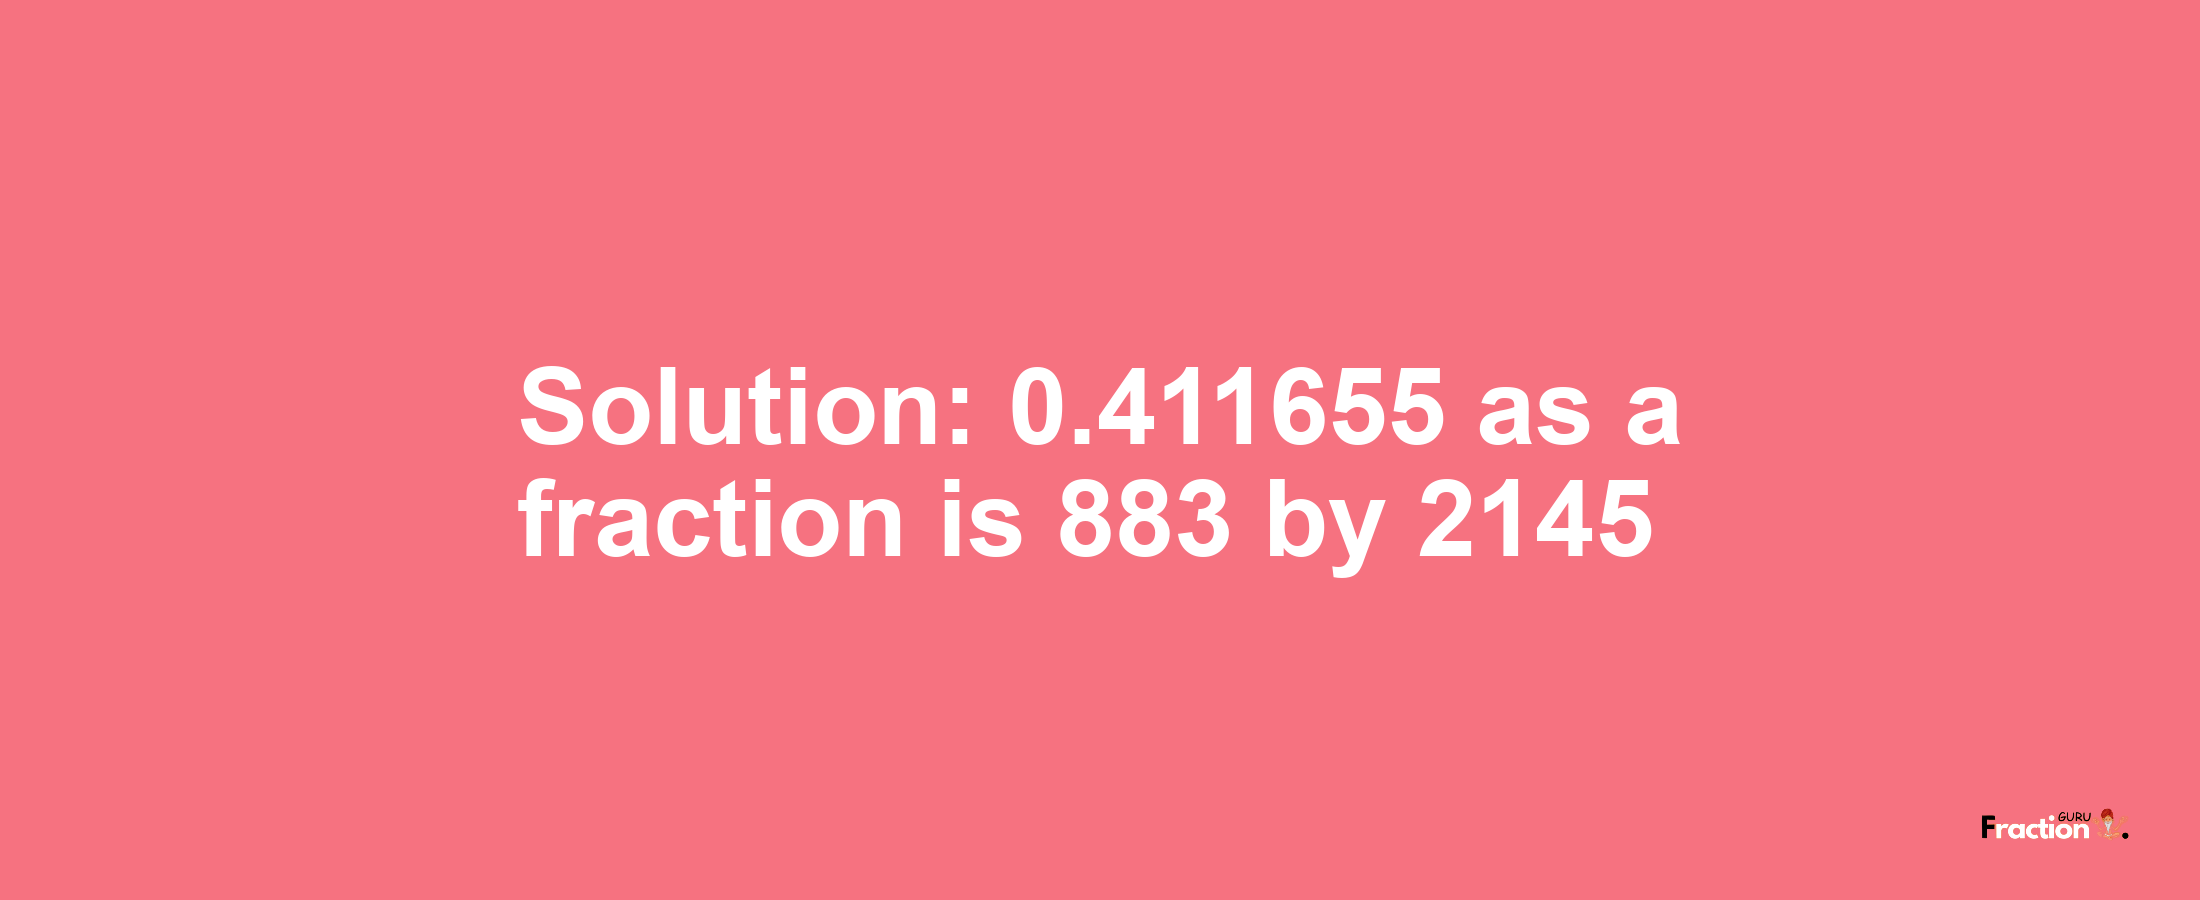 Solution:0.411655 as a fraction is 883/2145